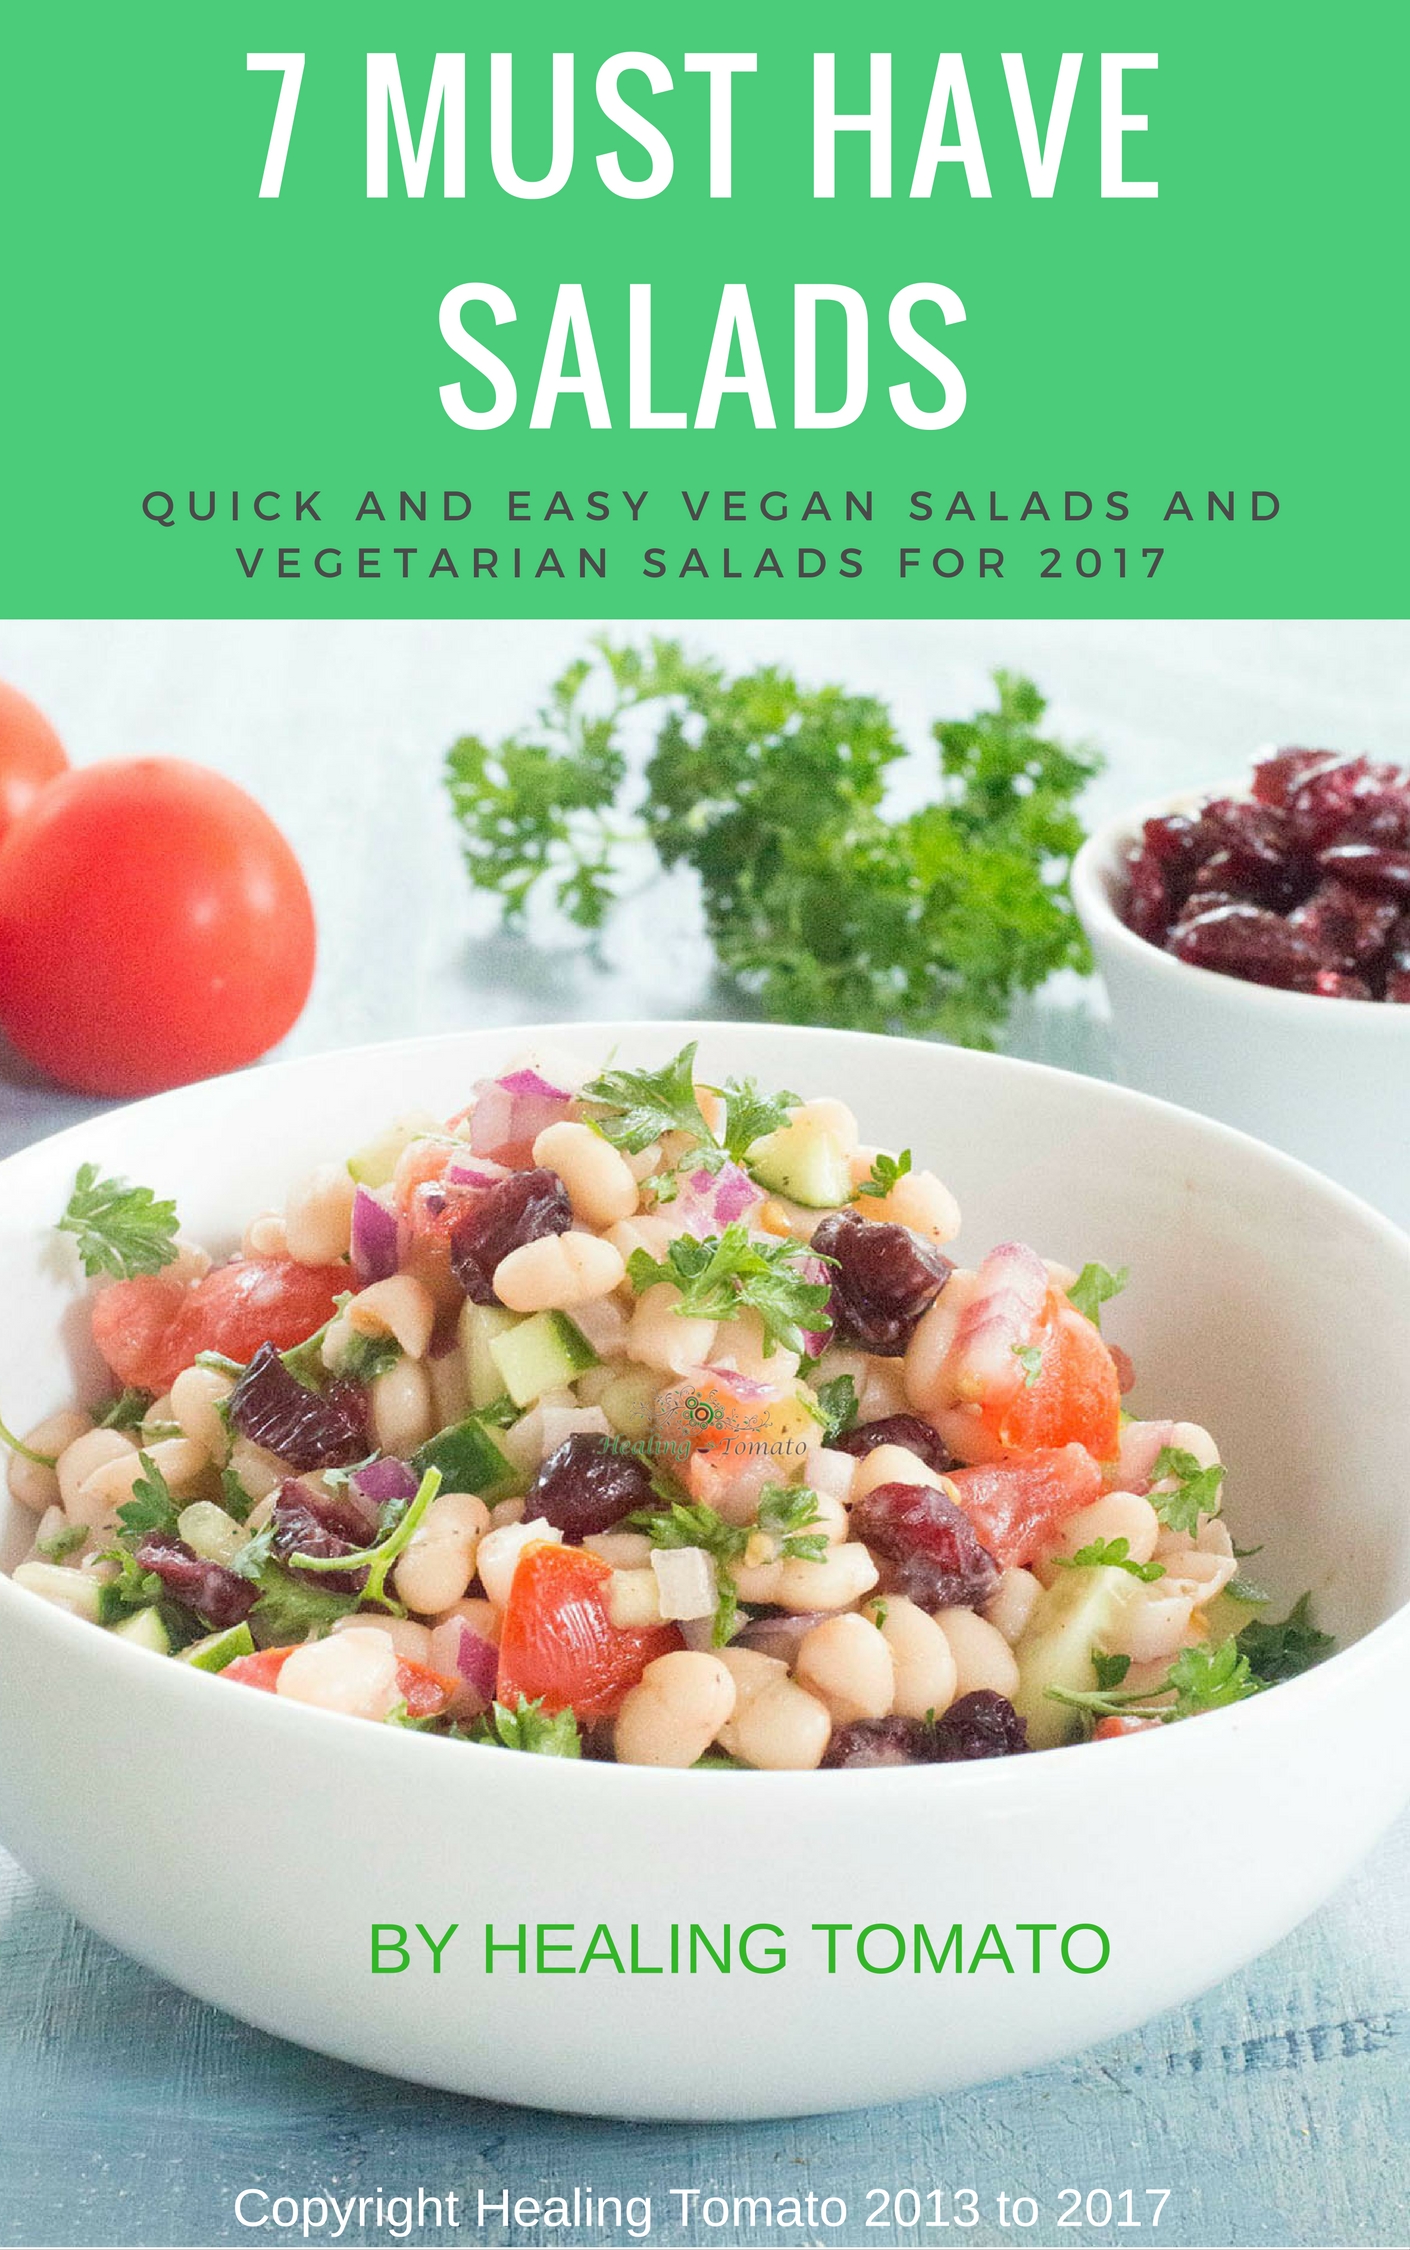 7 Must Have Salads eBook For A Healthier You In 2017 (eBooks)